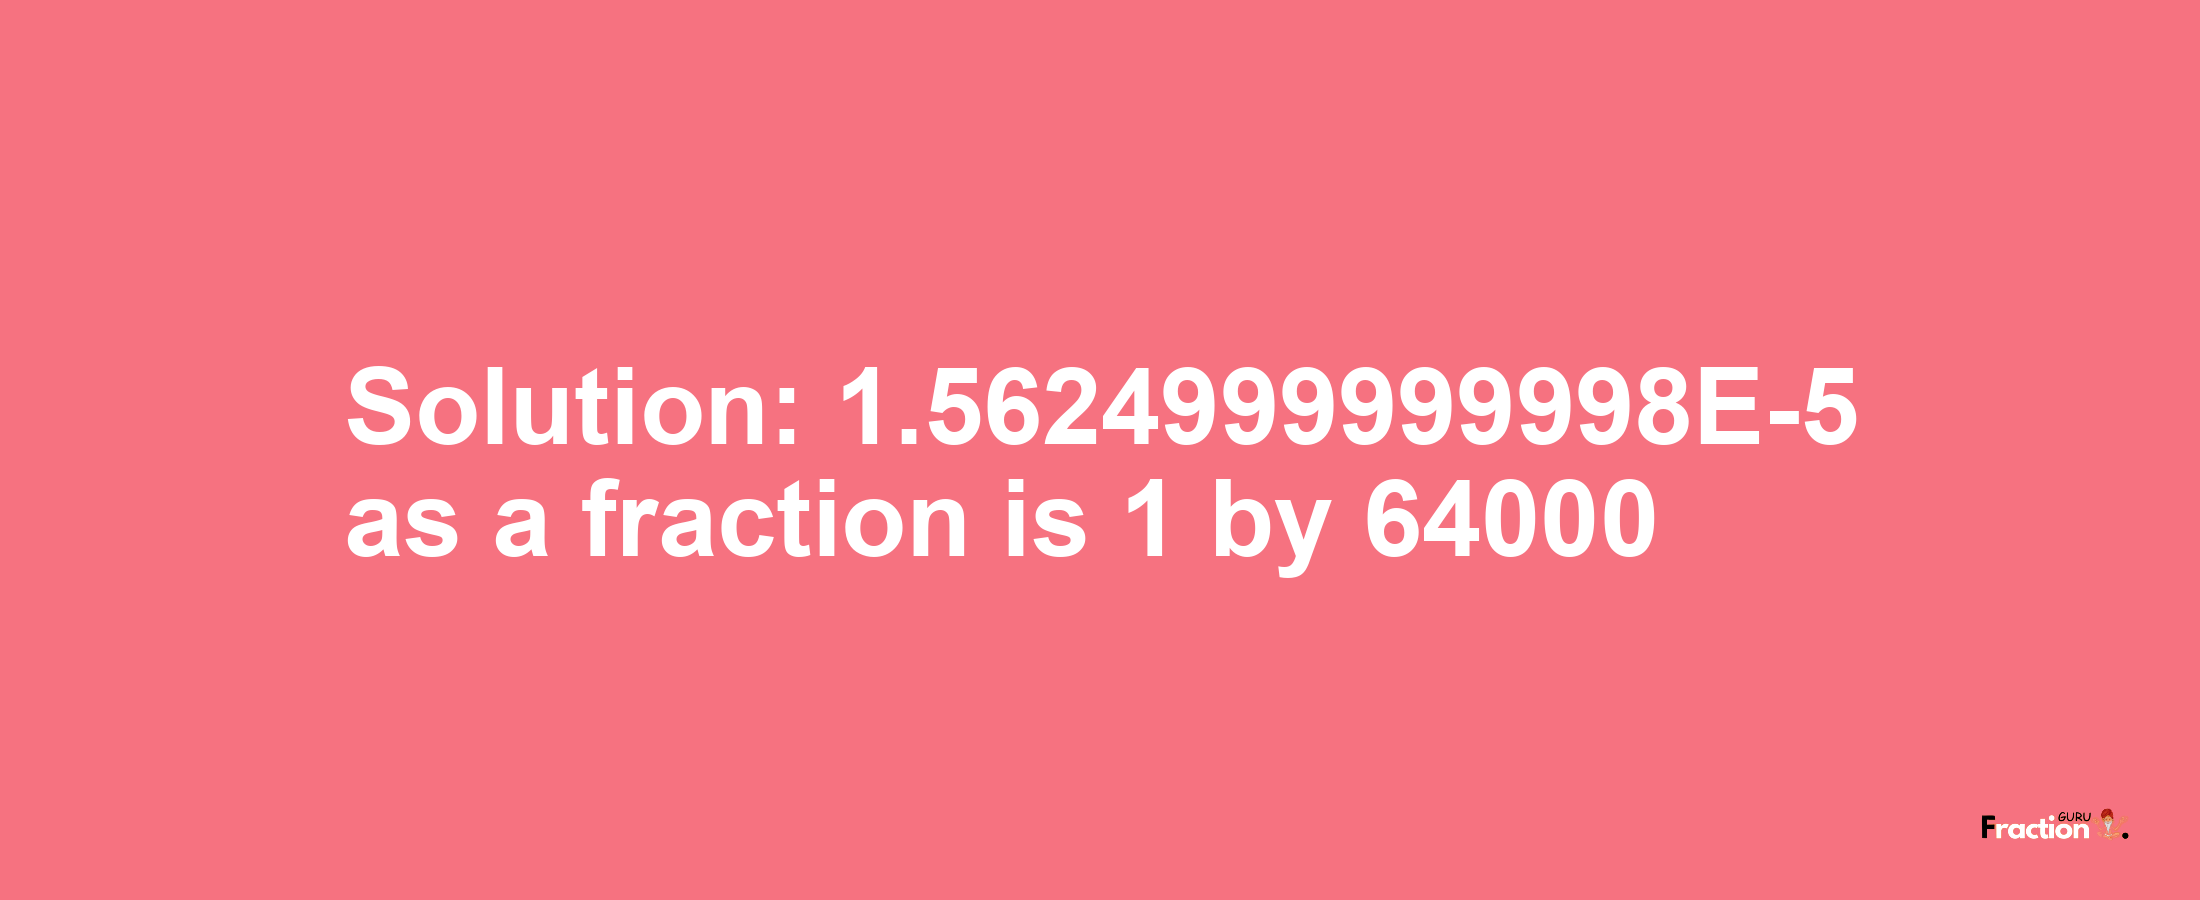 Solution:1.5624999999998E-5 as a fraction is 1/64000